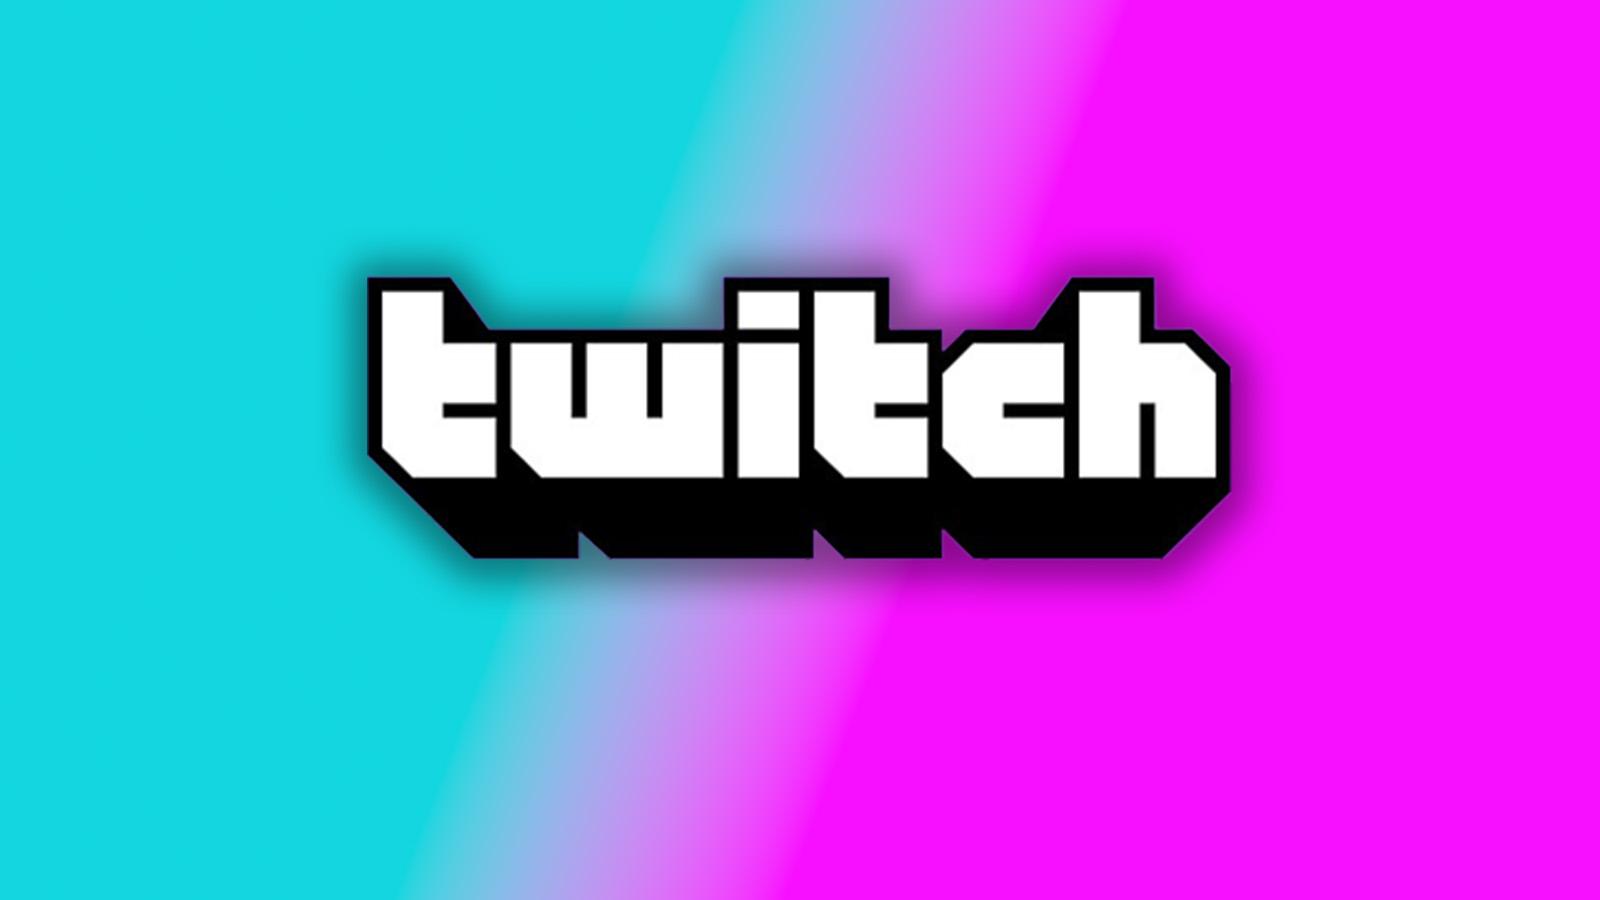 IShowSpeed has suddenly been unbanned on Twitch after nearly two years